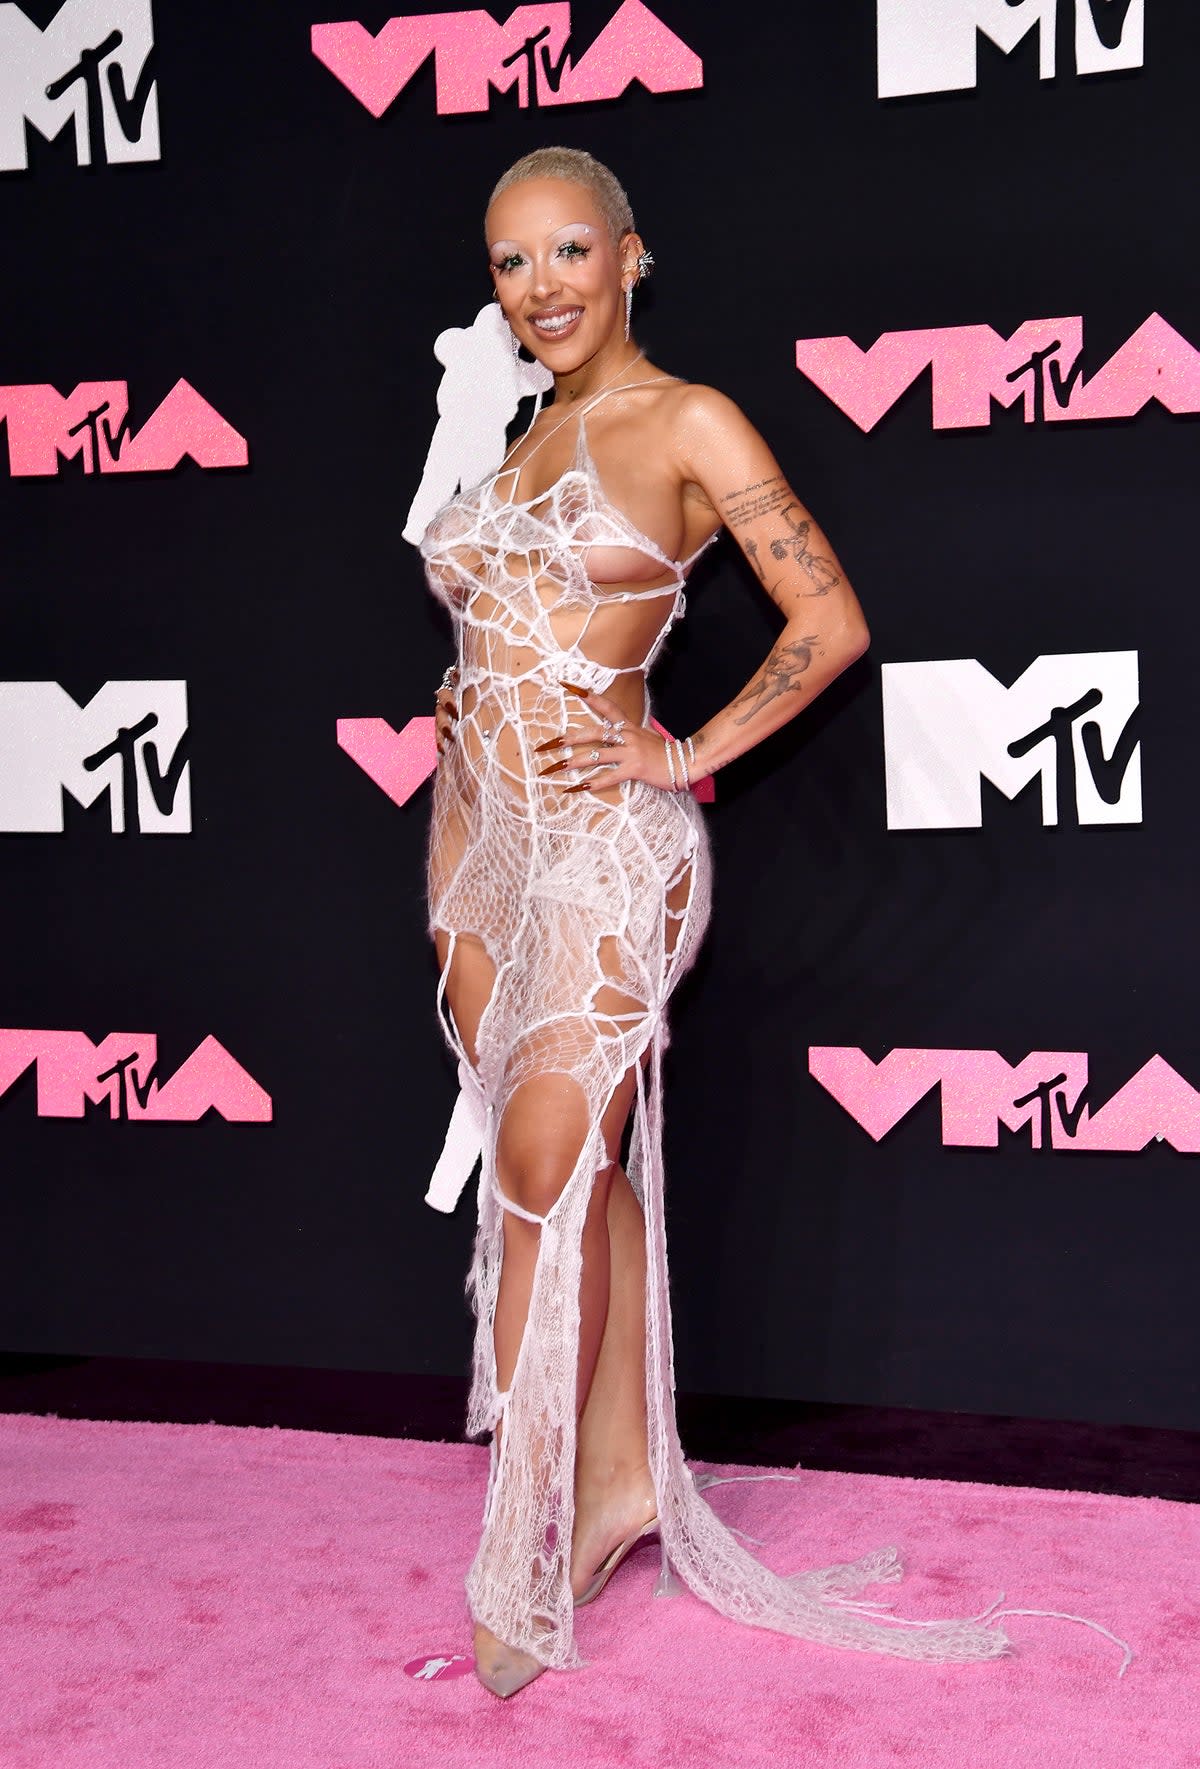  (Getty Images for MTV)